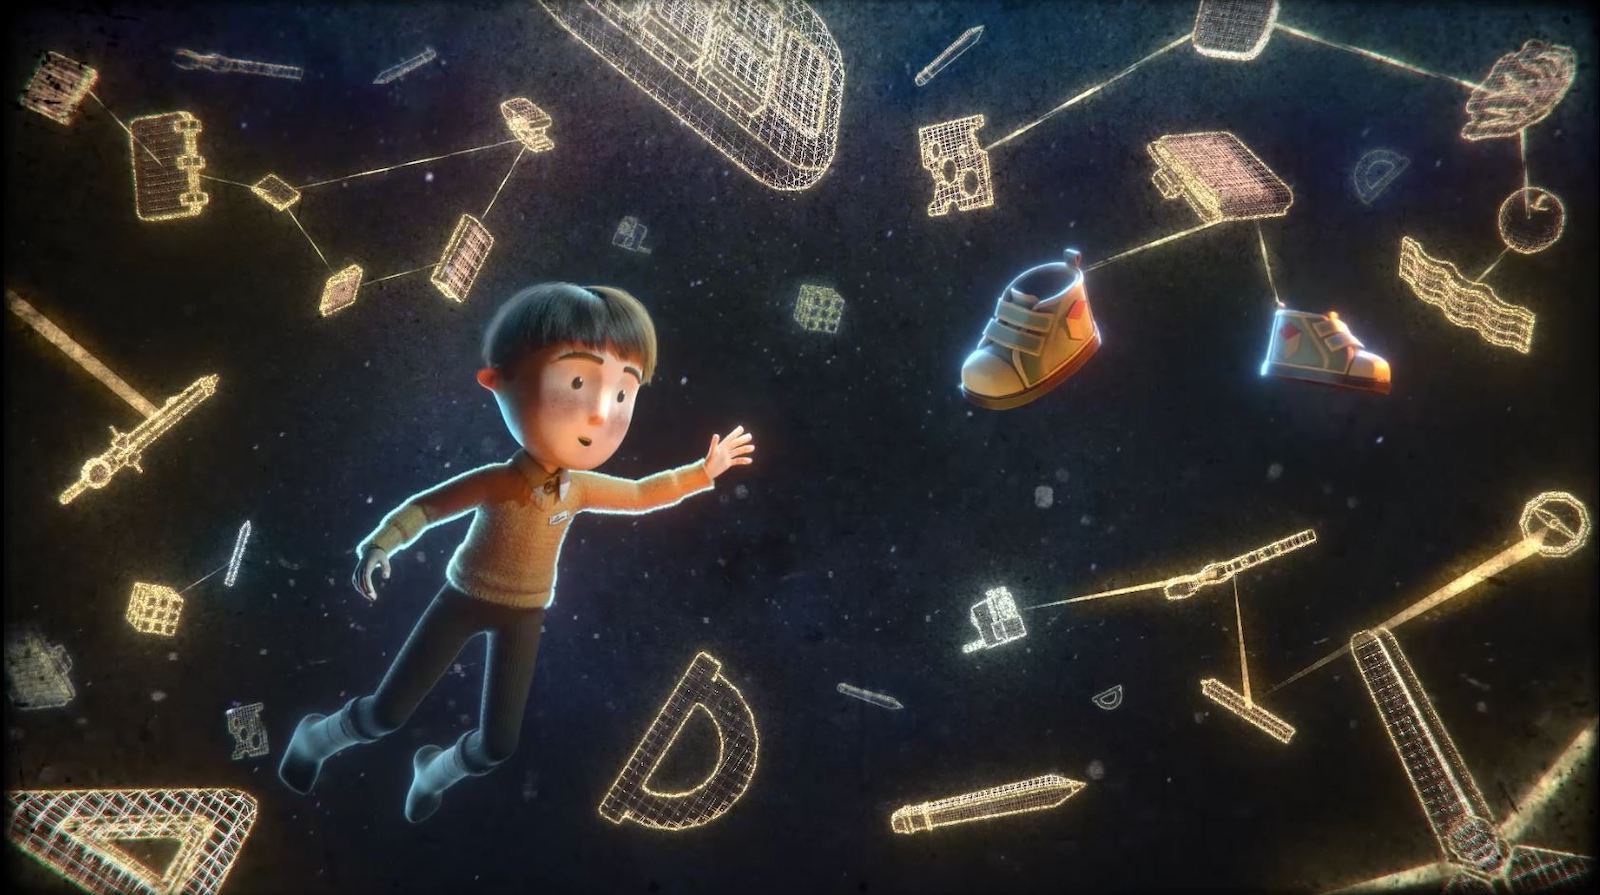 A boy reaching for his shoes in space.